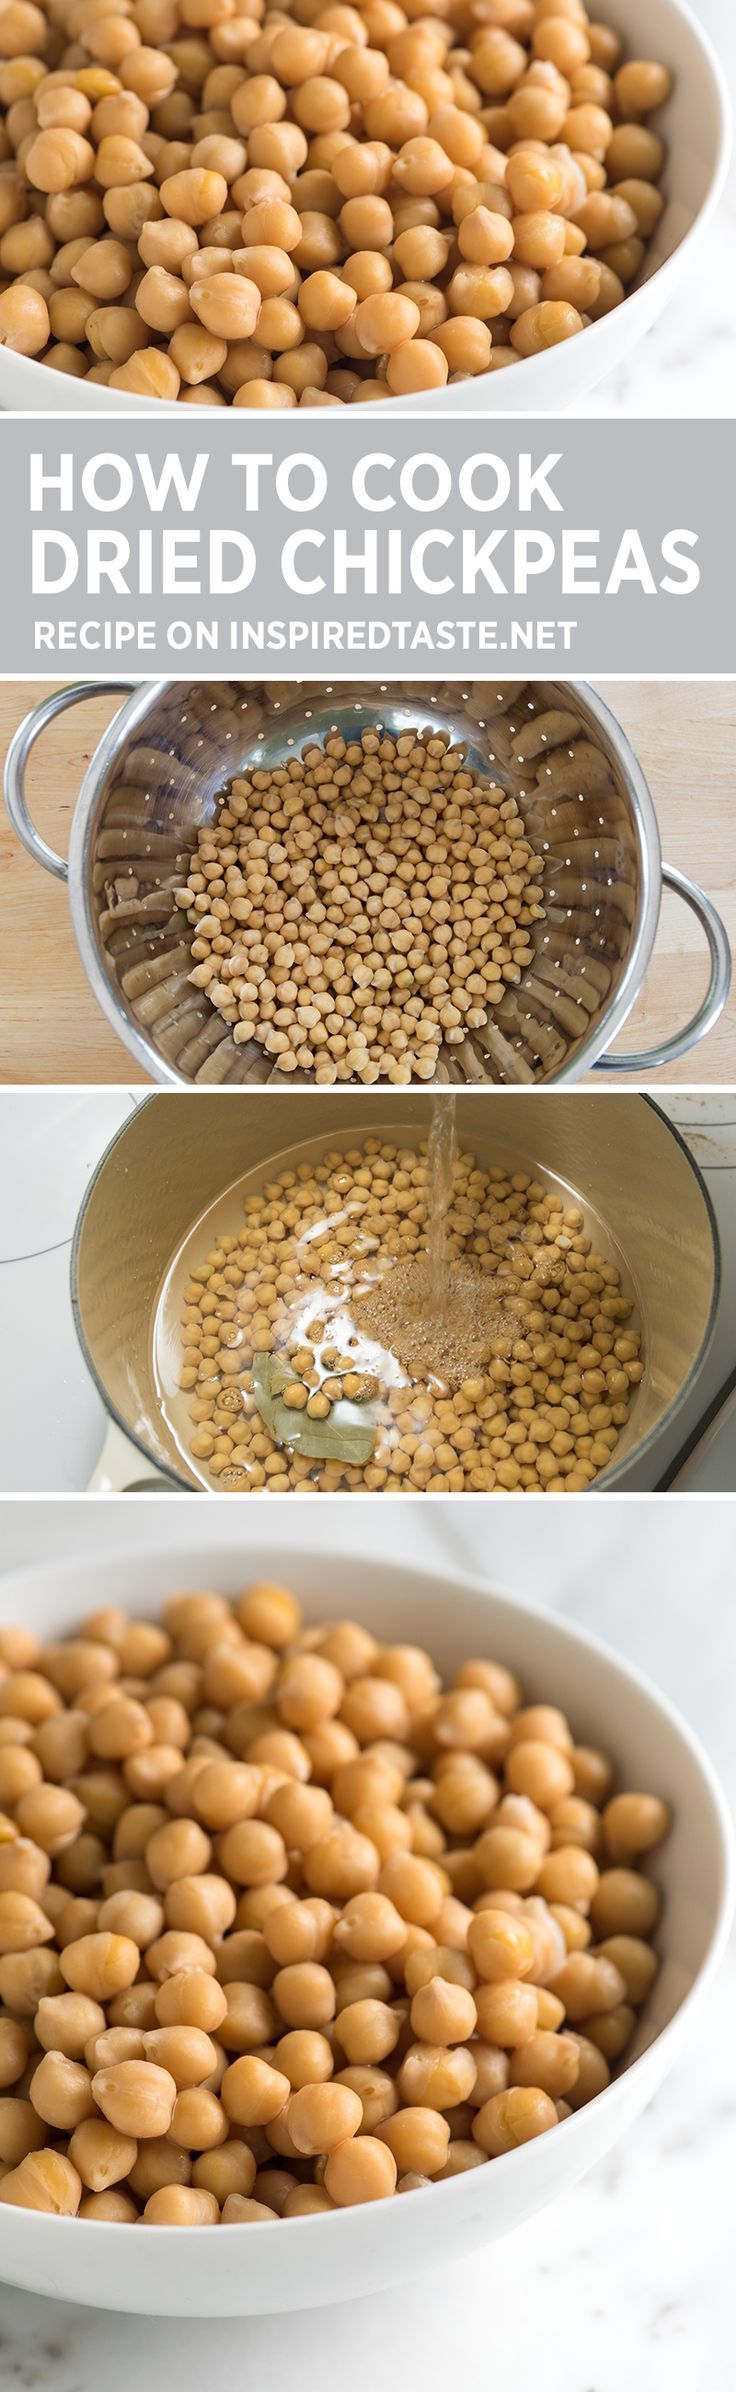 How To Roast Chickpeas From Dry